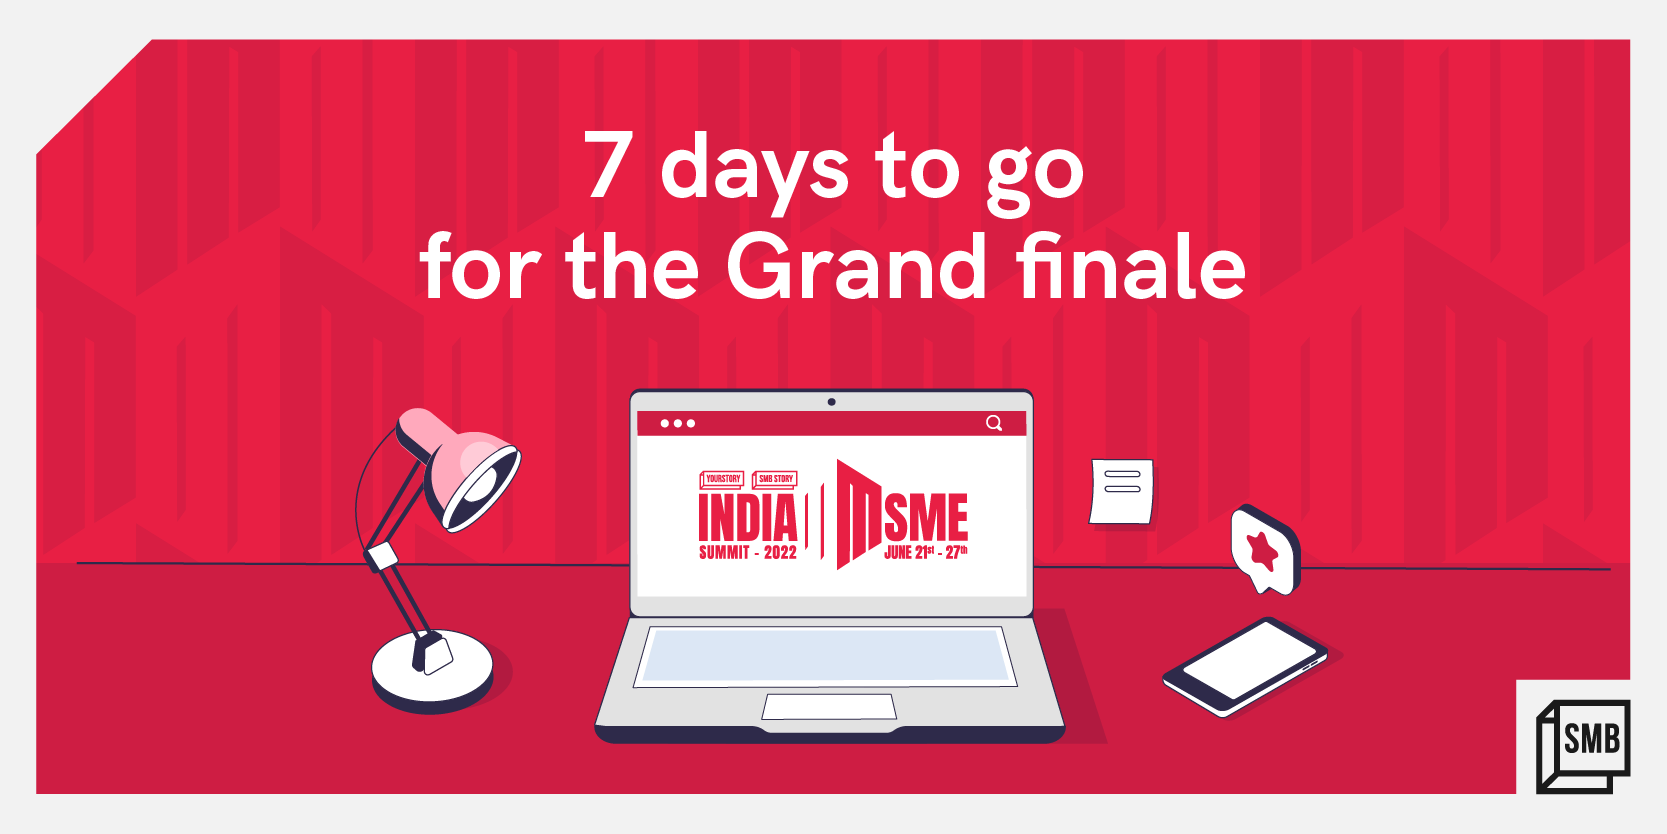 7 days to go: Countdown to the grand finale of India MSME Summit 2022, the country’s largest event for small businesses